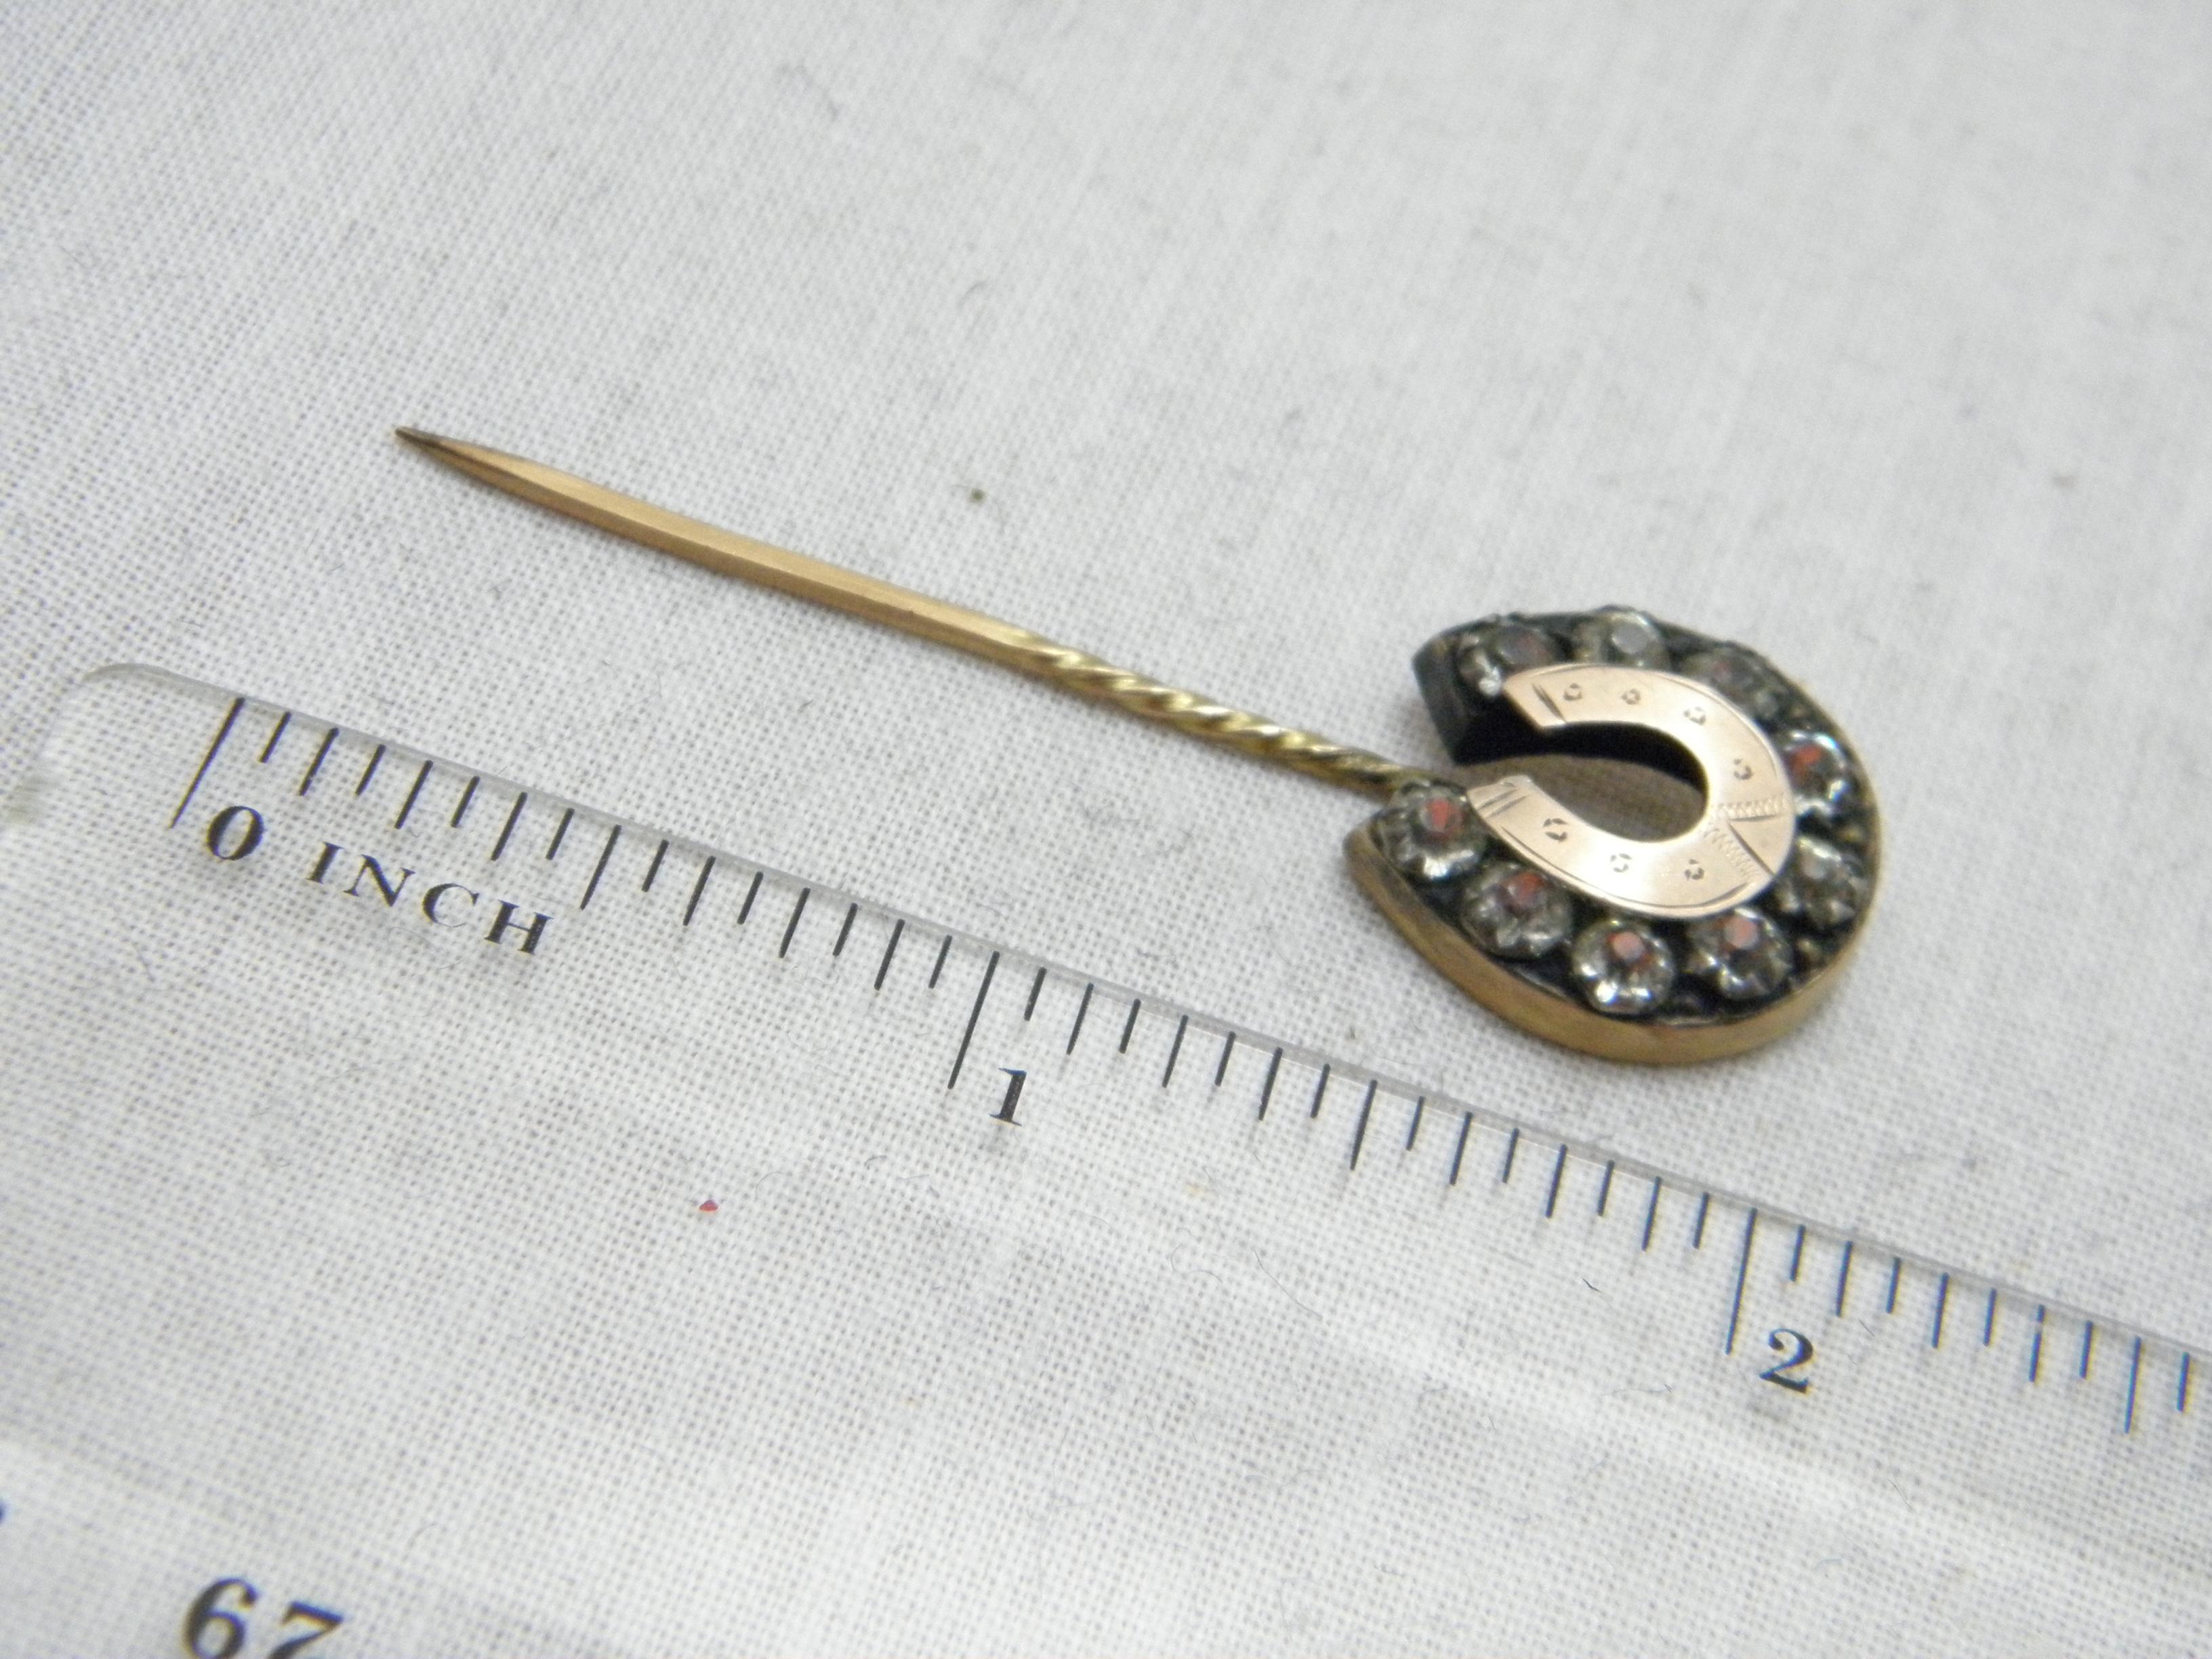 Antique 15ct Gold Diamond Paste Horseshoe Pin Brooch c1840 2.5g 625 Purity For Sale 4